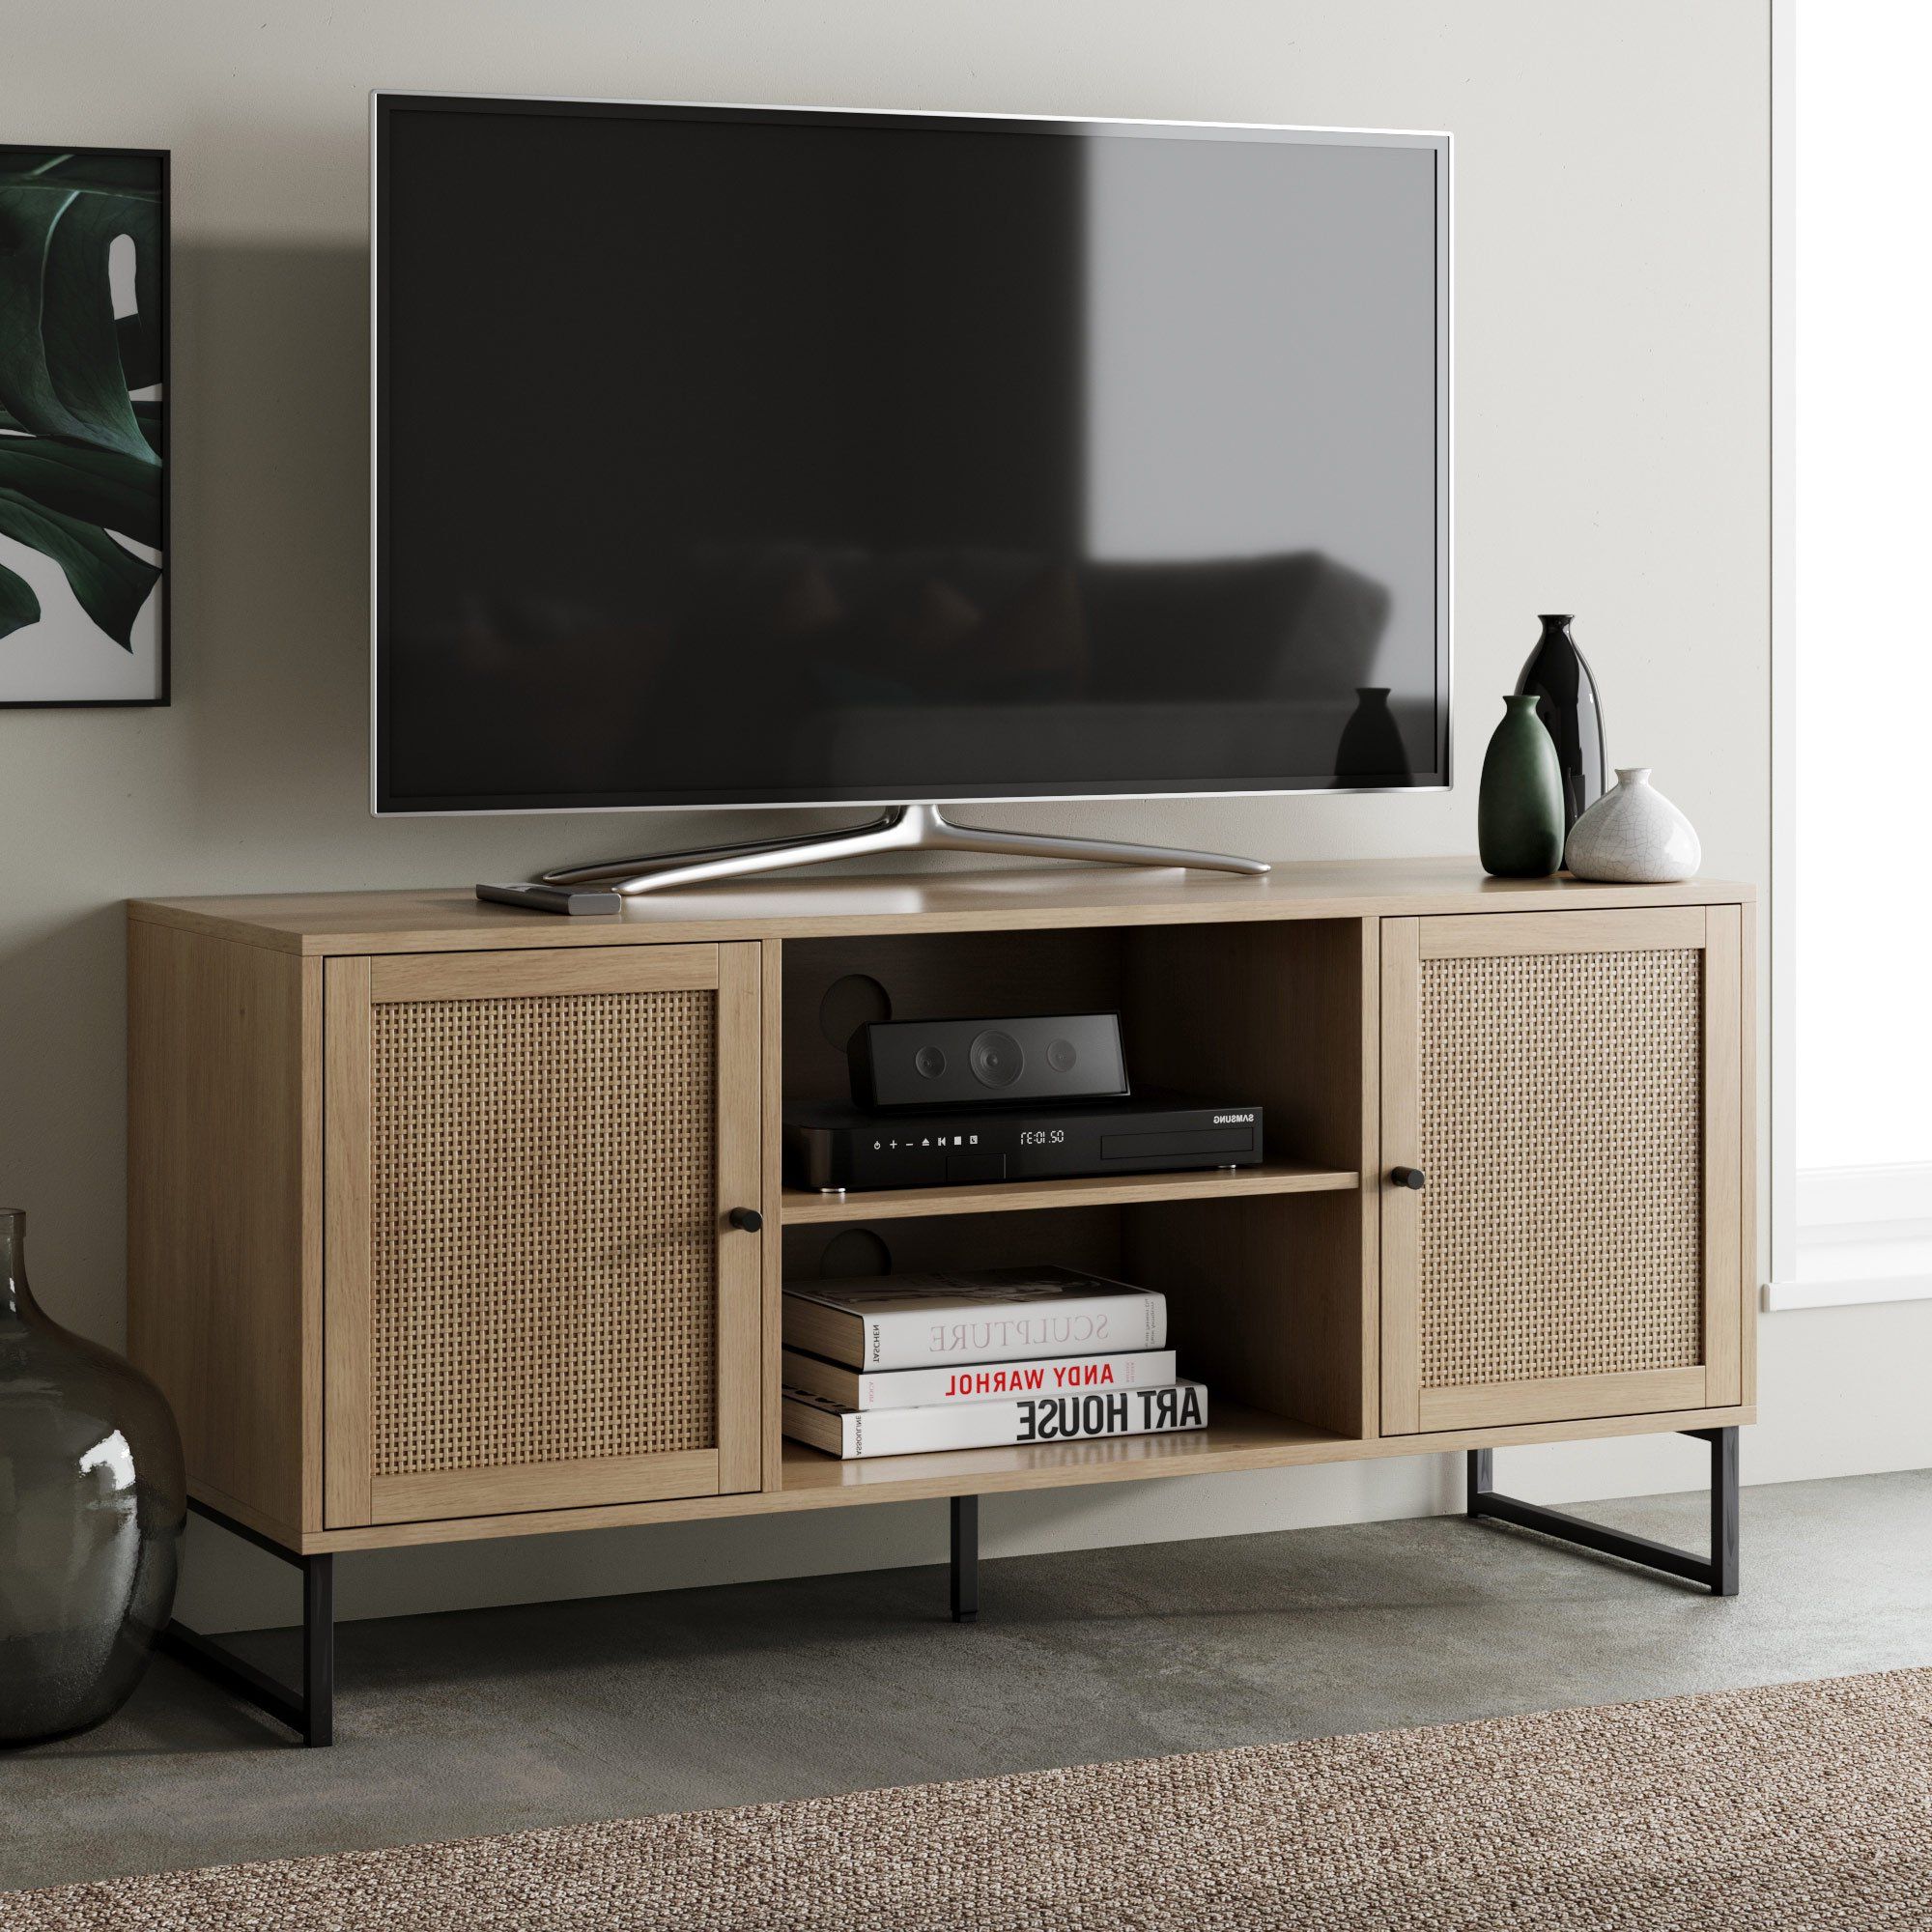 Nathan James Mina Modern Tv Stand Entertainment Cabinet Within Well Known Modern Black Tv Stands On Wheels (View 9 of 10)